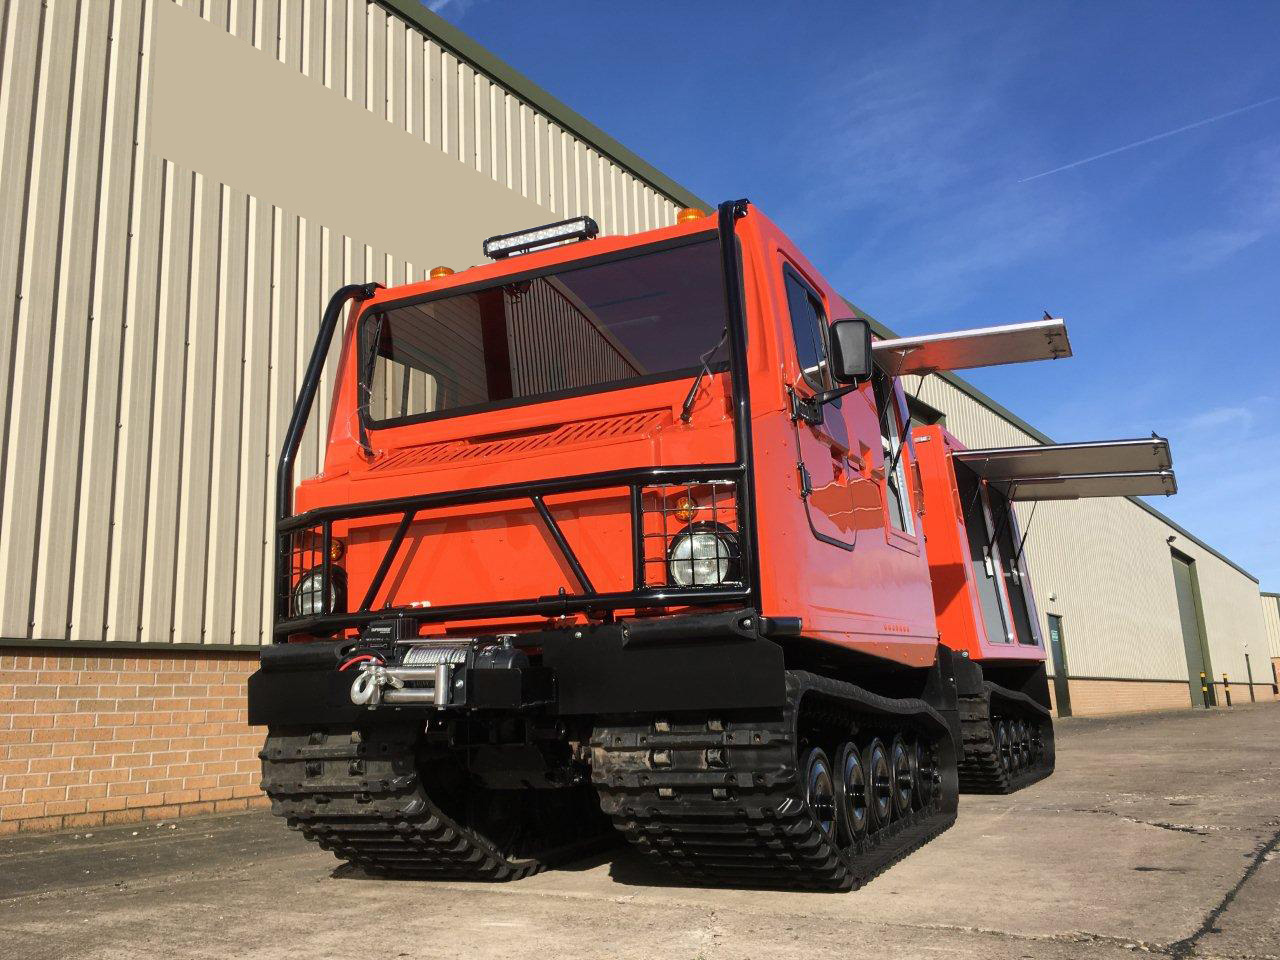 military vehicles for sale - <a href='/index.php/main-menu-stock/manufacturer/hagglunds/50253-hagglund-bv206-multi-purpose-vehicle' title='Read more...' class='joodb_titletink'>Hagglund BV206 Multi-Purpose Vehicle</a>